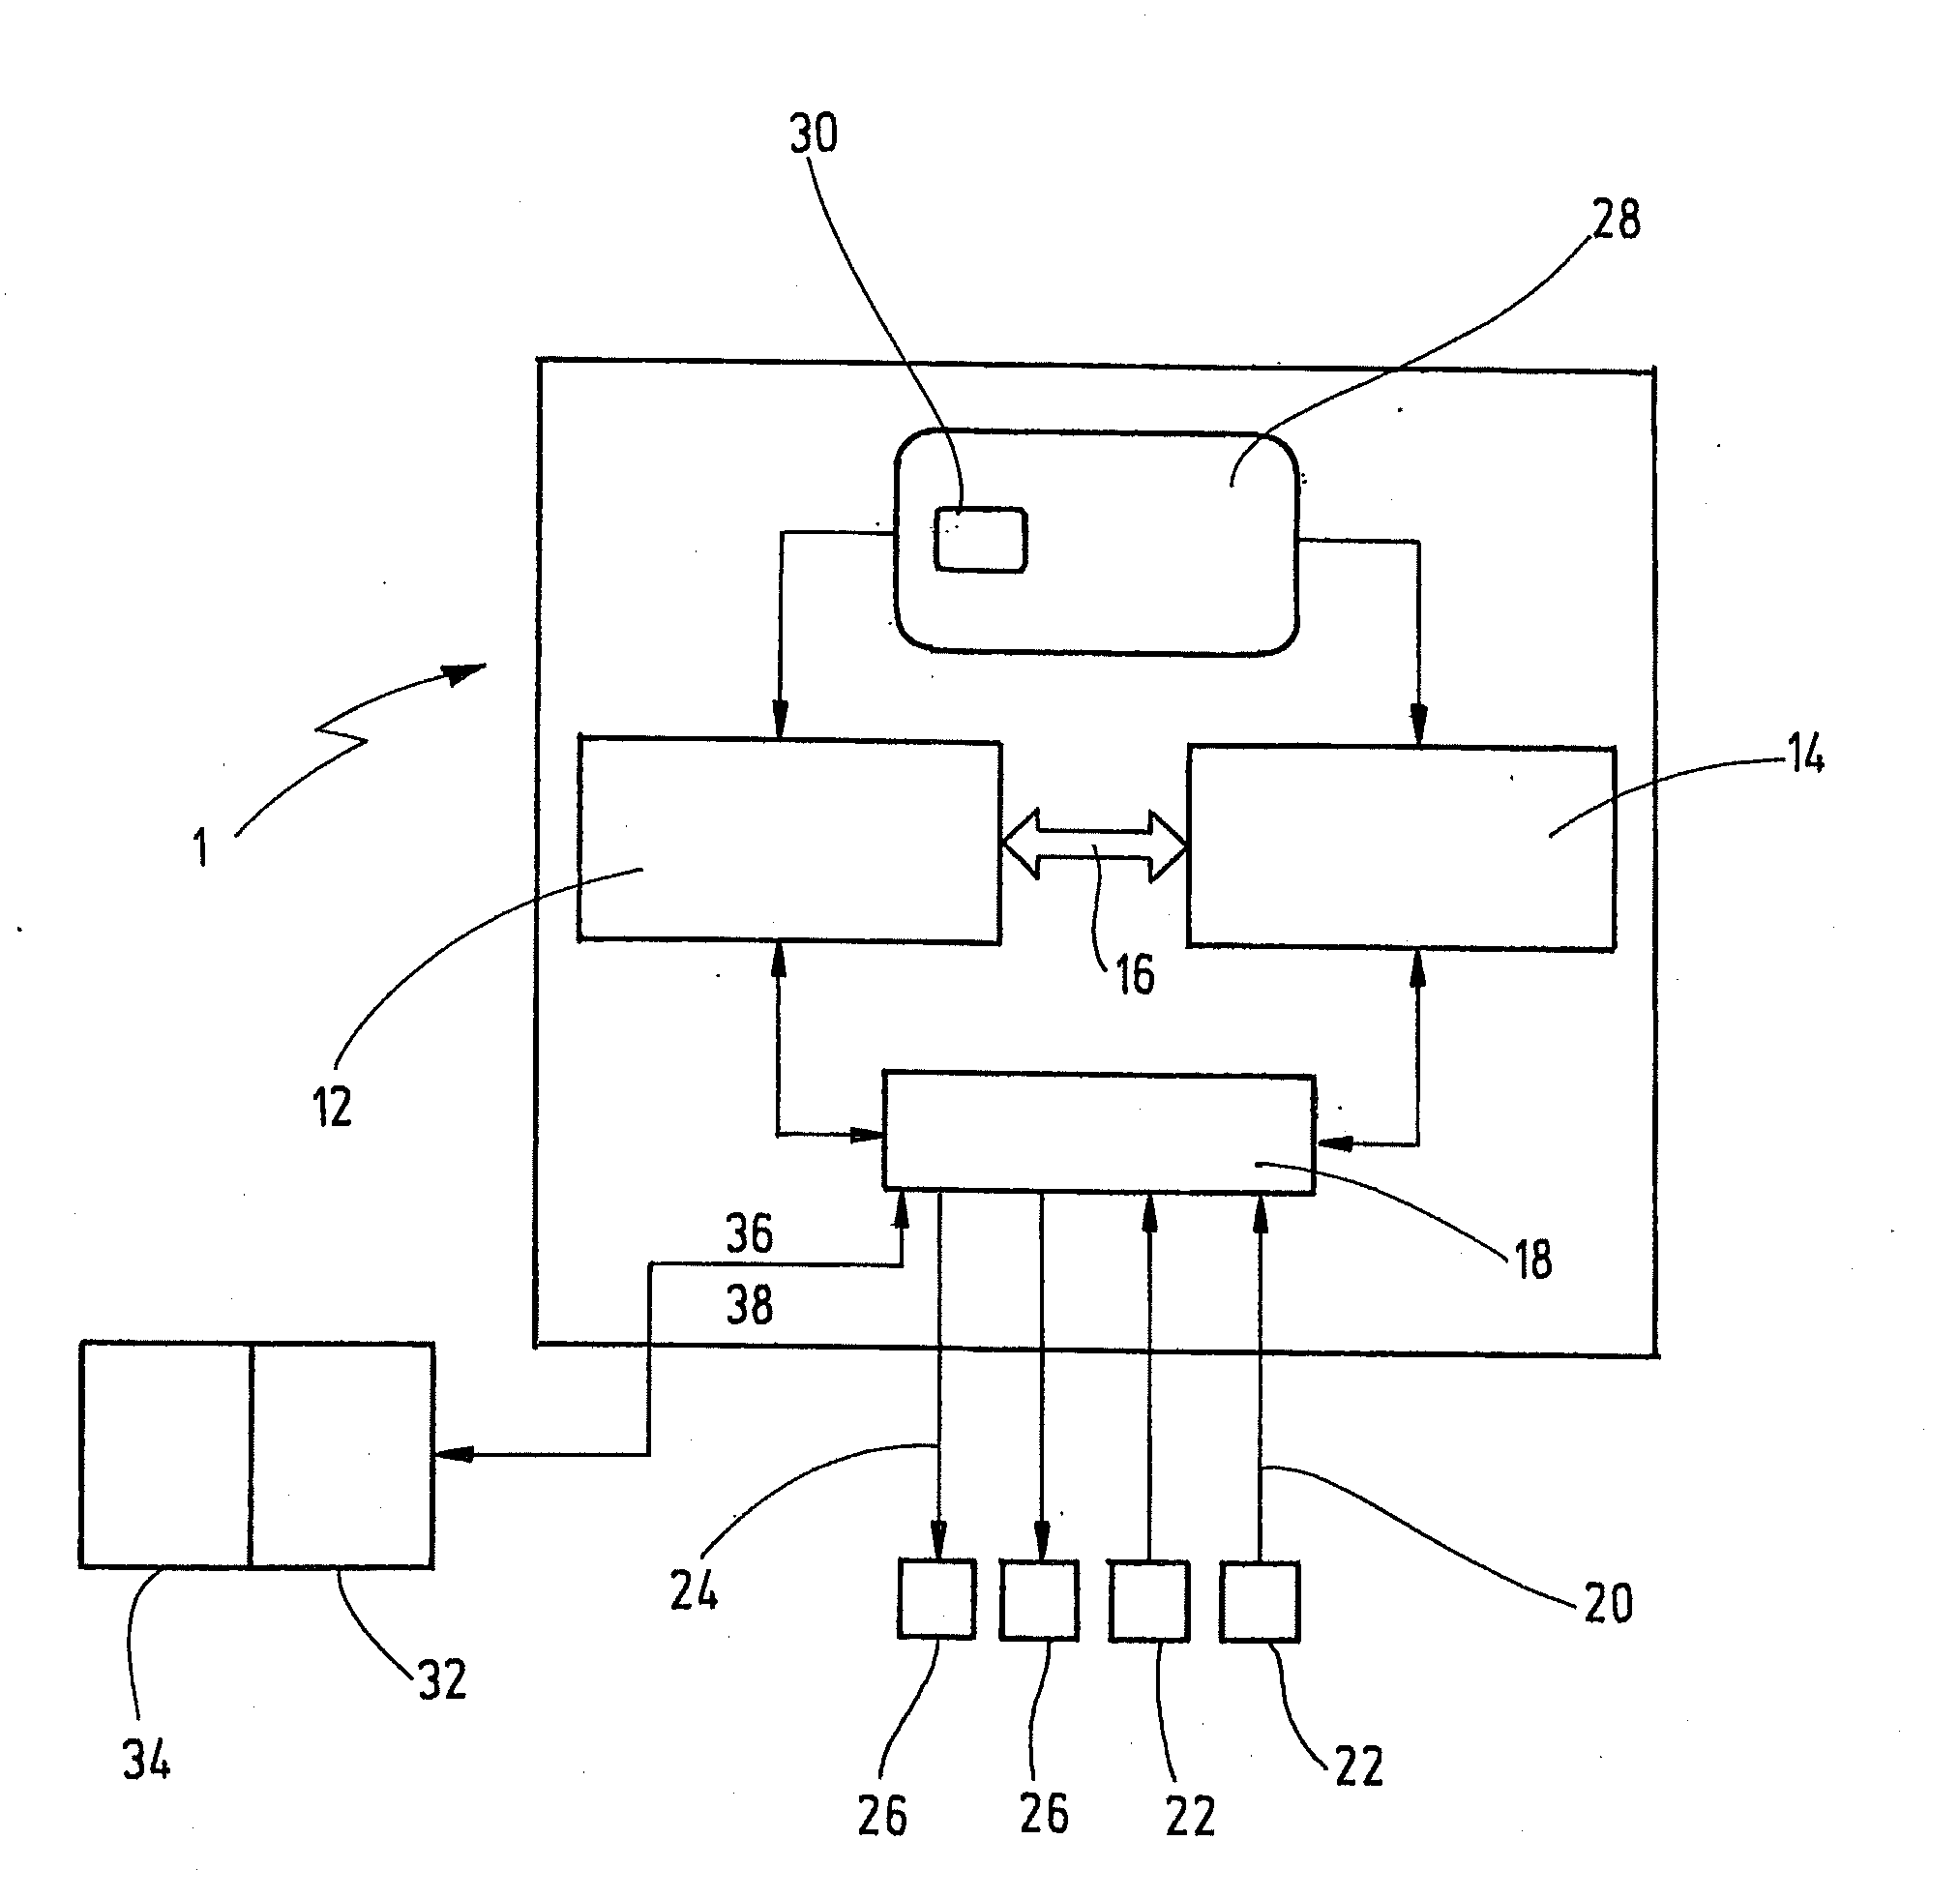 Safety controller having a removable data storage medium